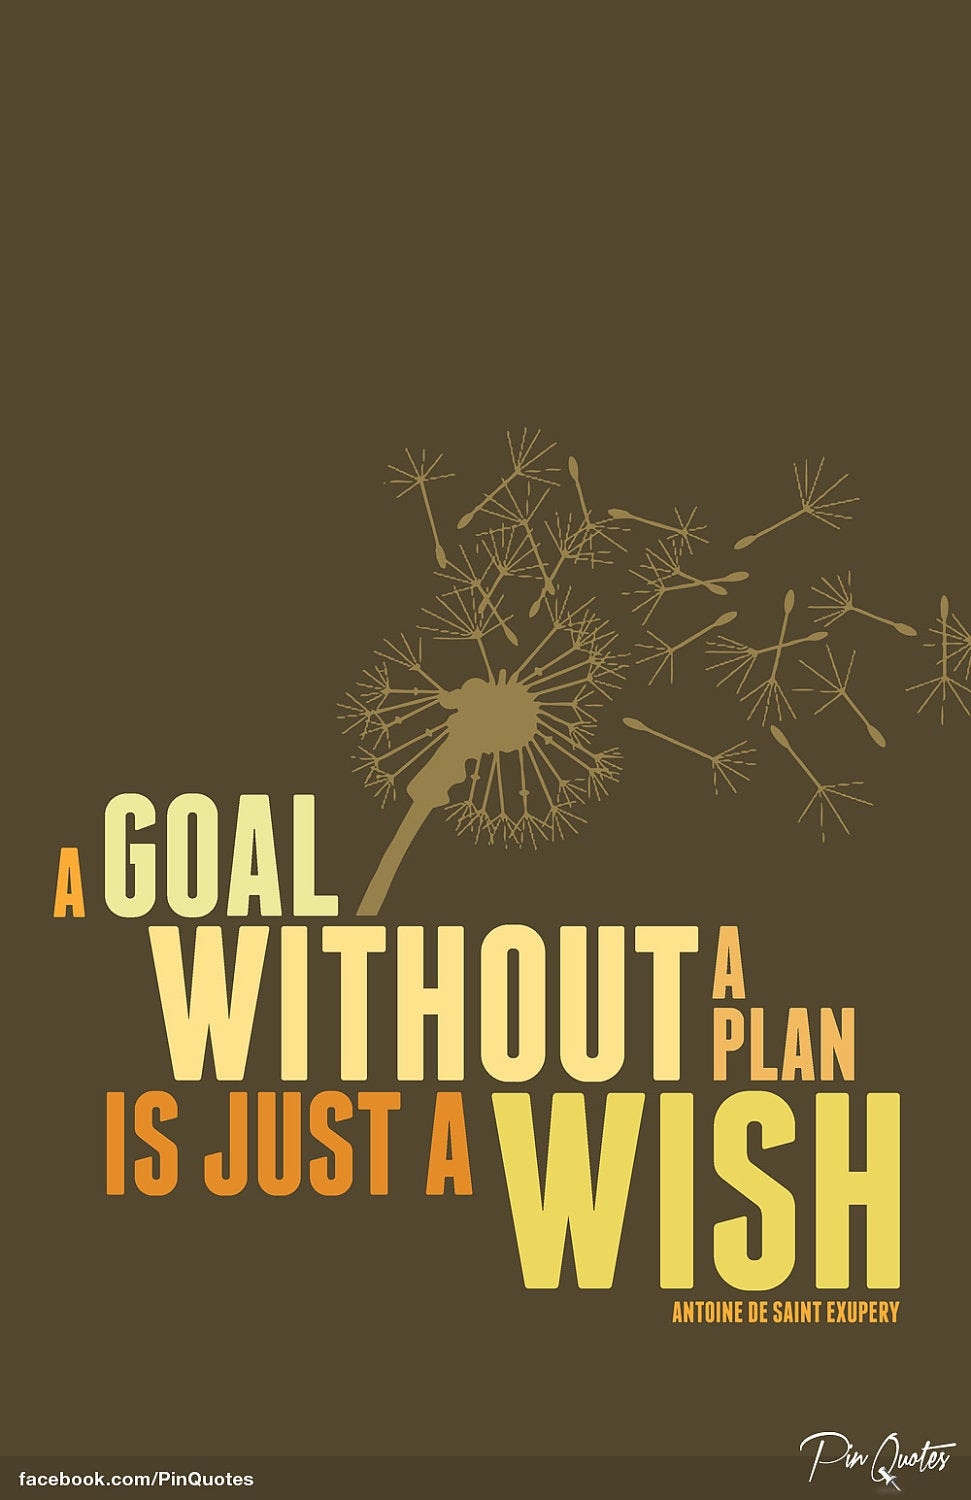 Inspirational Quotes About Goals
 Inspirational Quotes About Goals QuotesGram